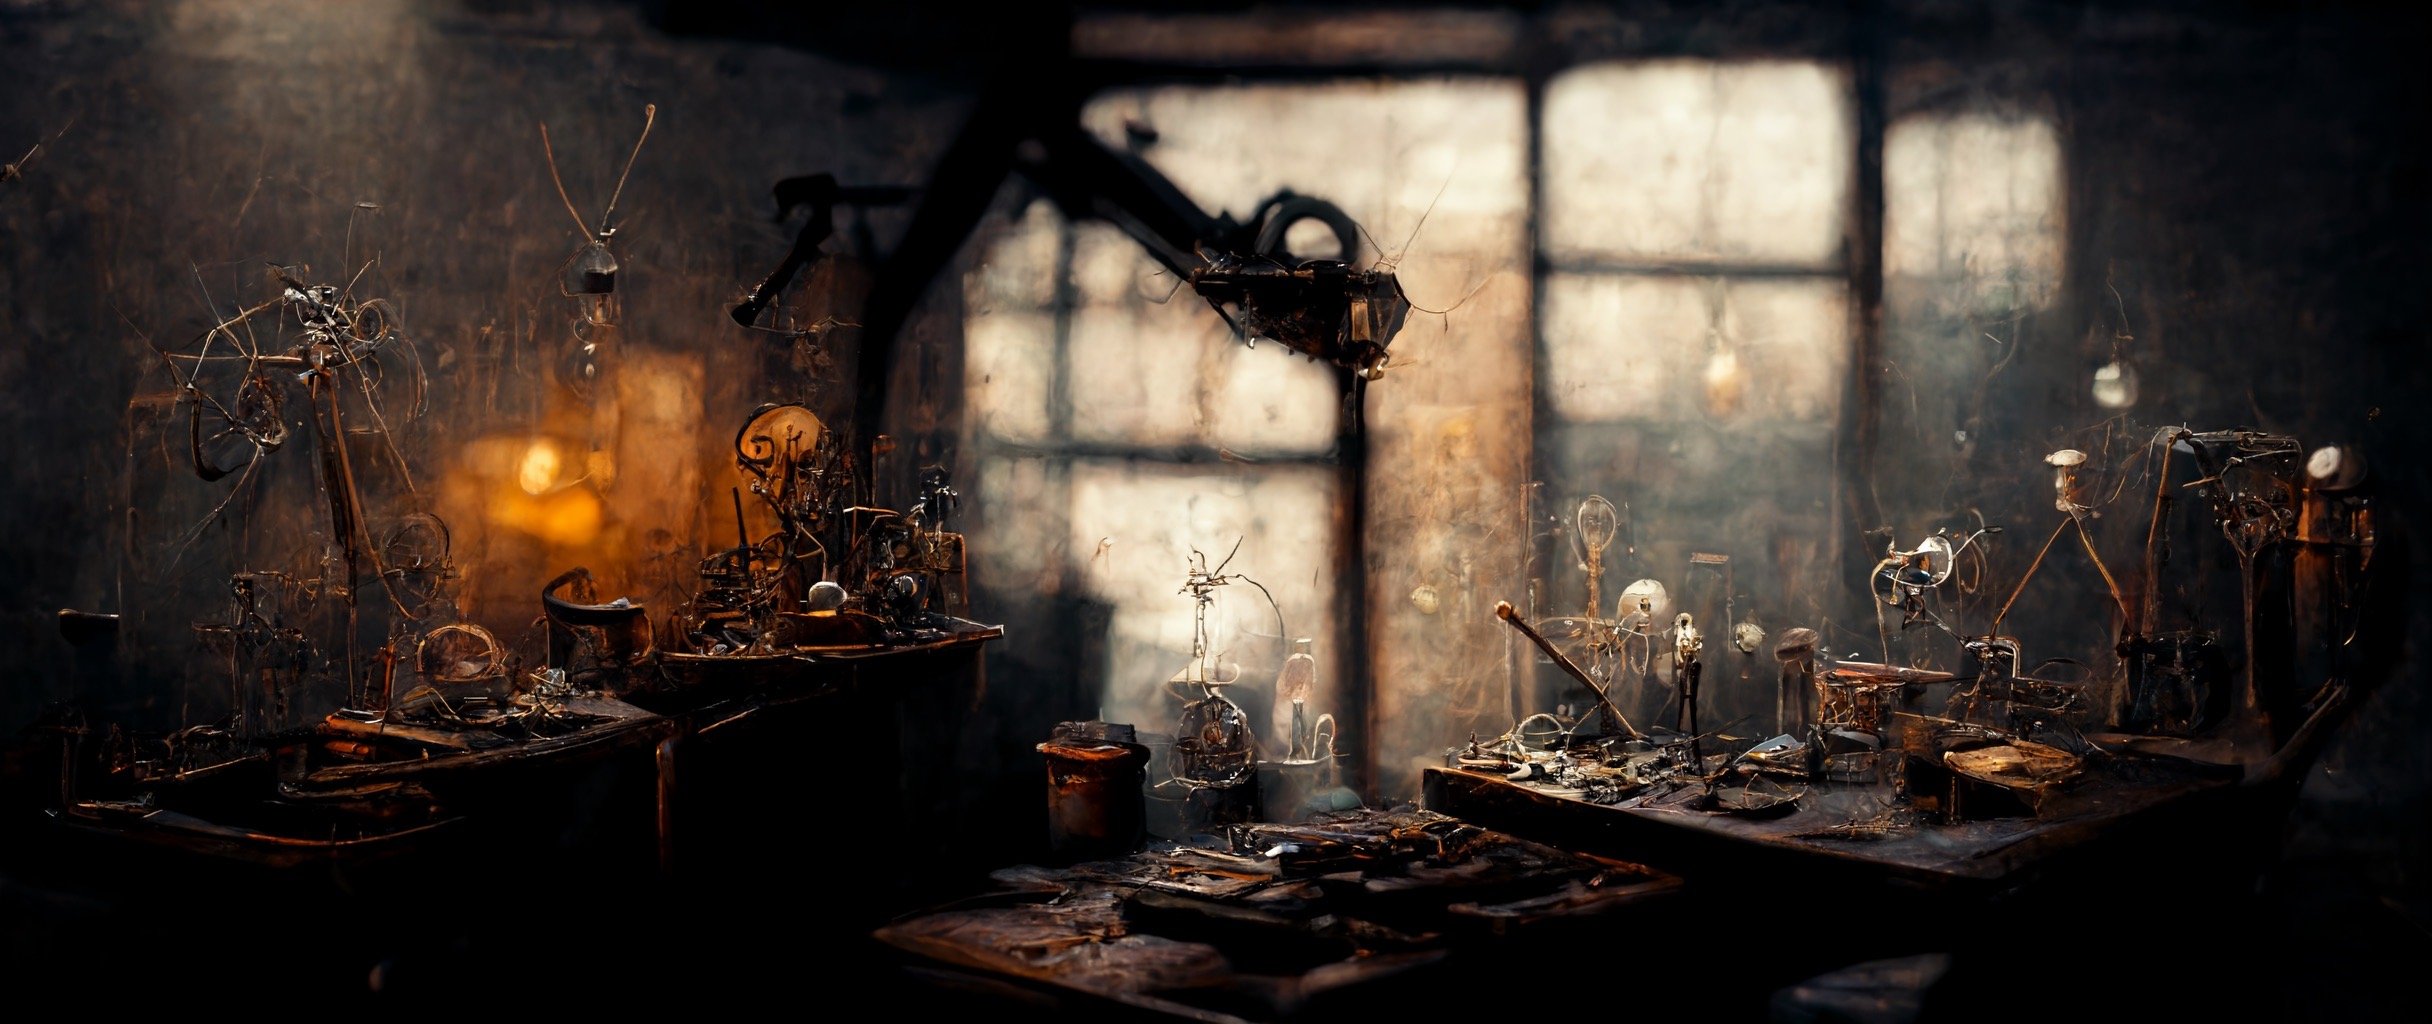 071e644e-46a9-48c6-a982-0f1734573321_S3RAPH_dimly_lit_old_workshop_with_Spider_webs_and_dusty_tools_and_detailed_trinkets_all_over._Mysterious_a.JPG